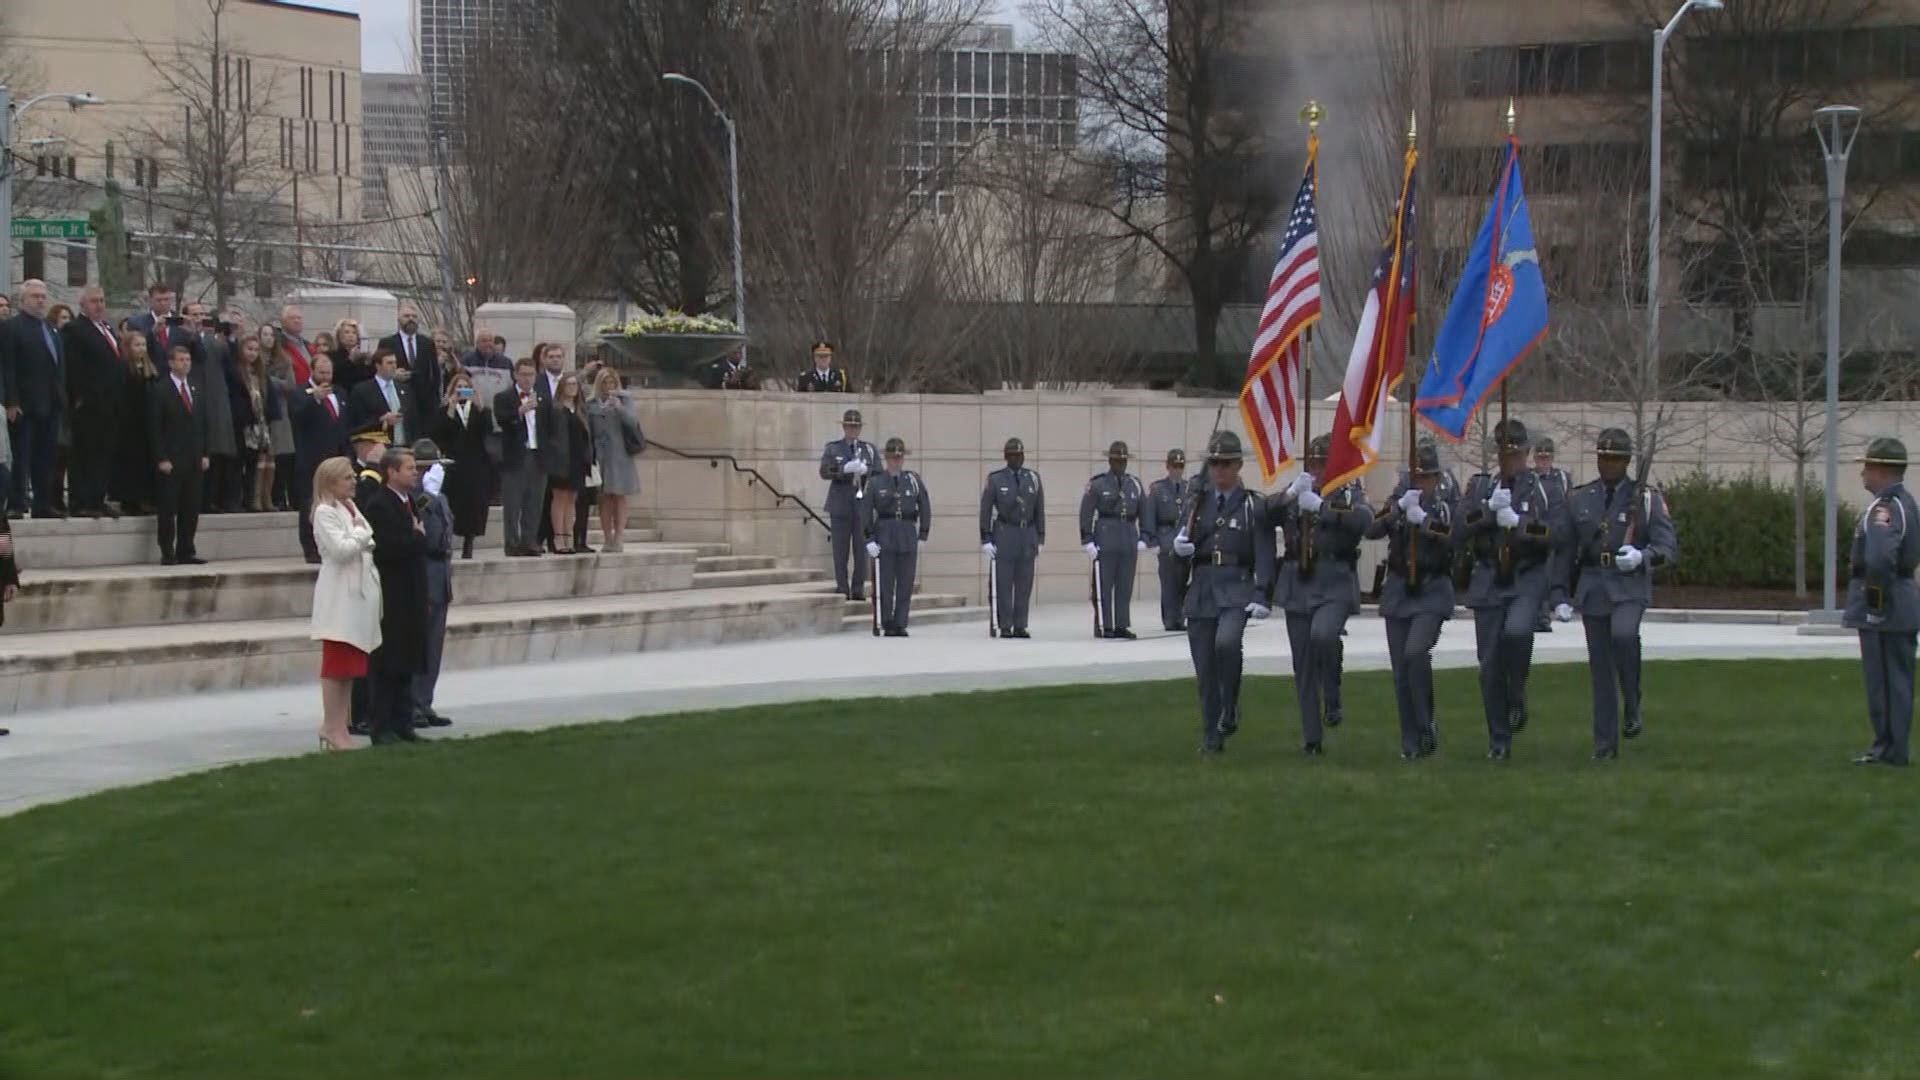 Governor Brian Kemp does a Review of the Troops in Liberty Plaza after his inauguration as 83rd governor of Georgia.